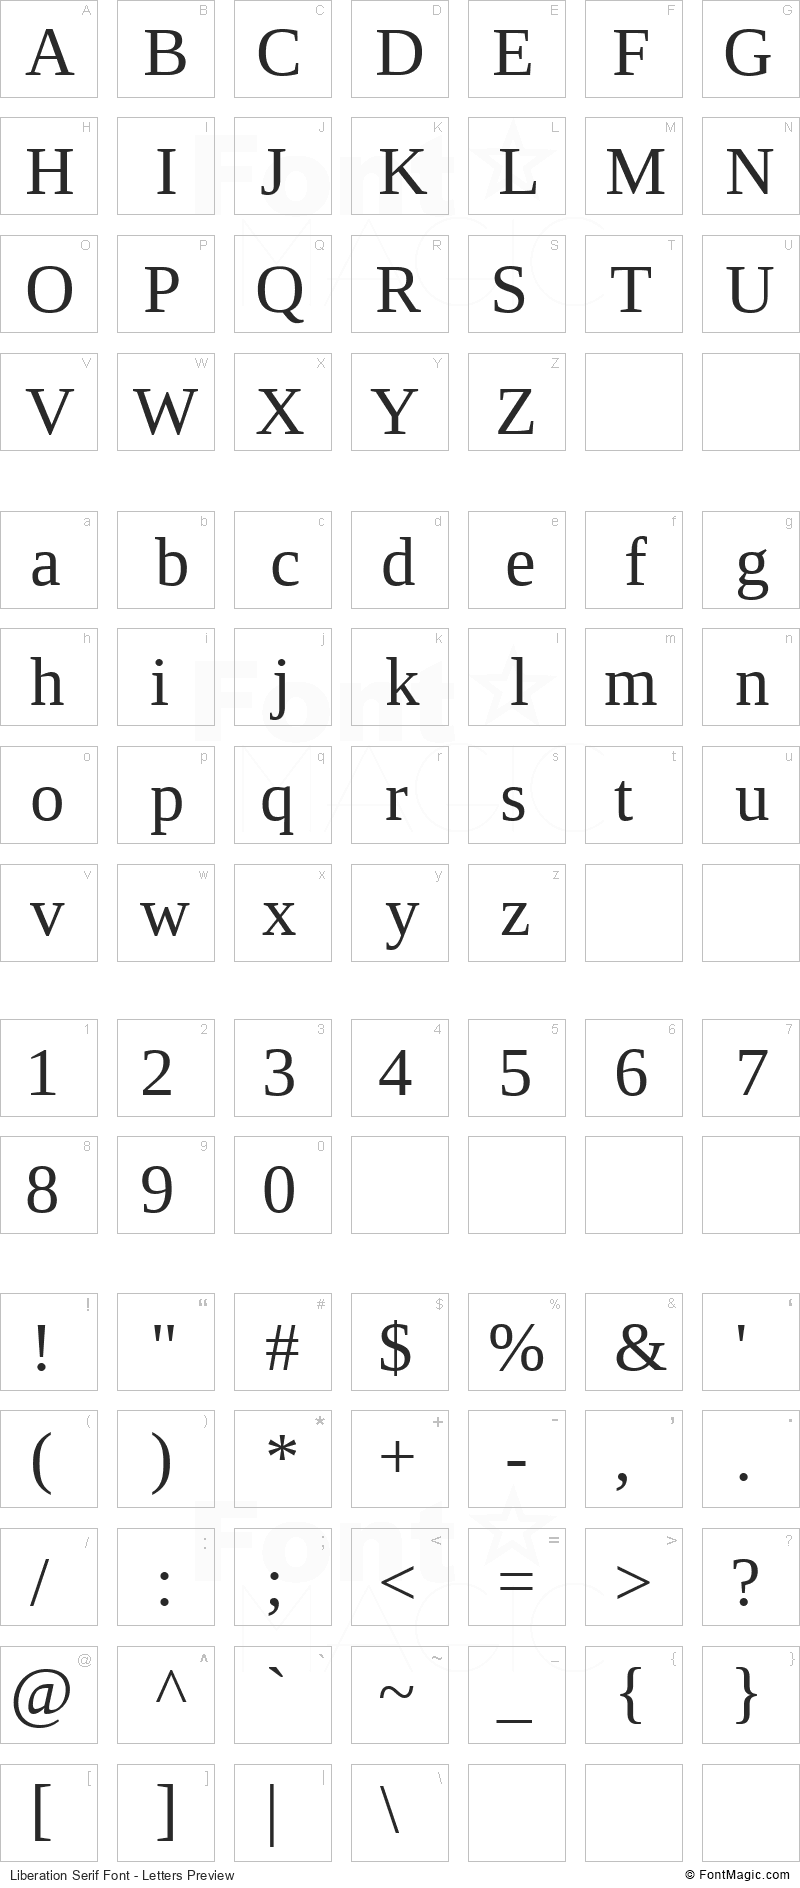 Liberation Serif Font - All Latters Preview Chart